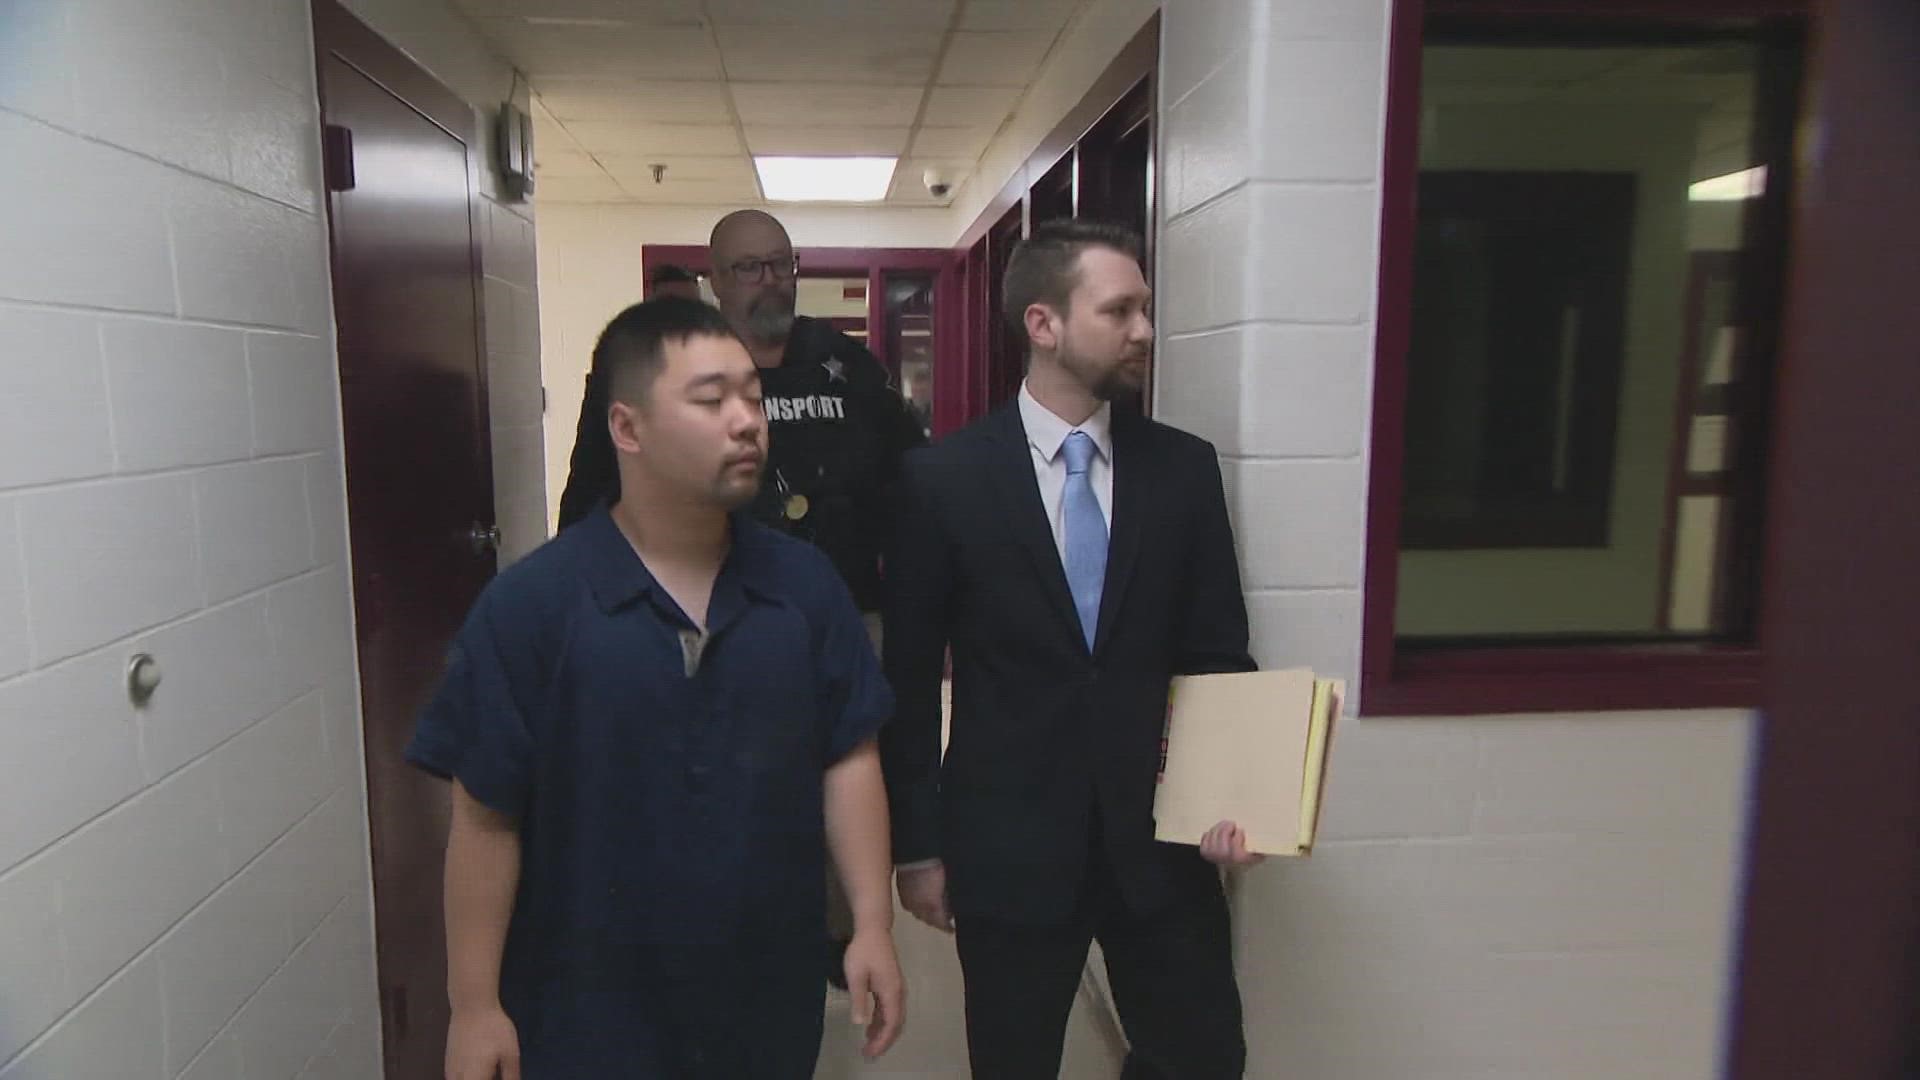 Ji Min Sha, the suspect in a Purdue dormitory homicide, will get a mental health evaluation after the the judge granted the defense's request.